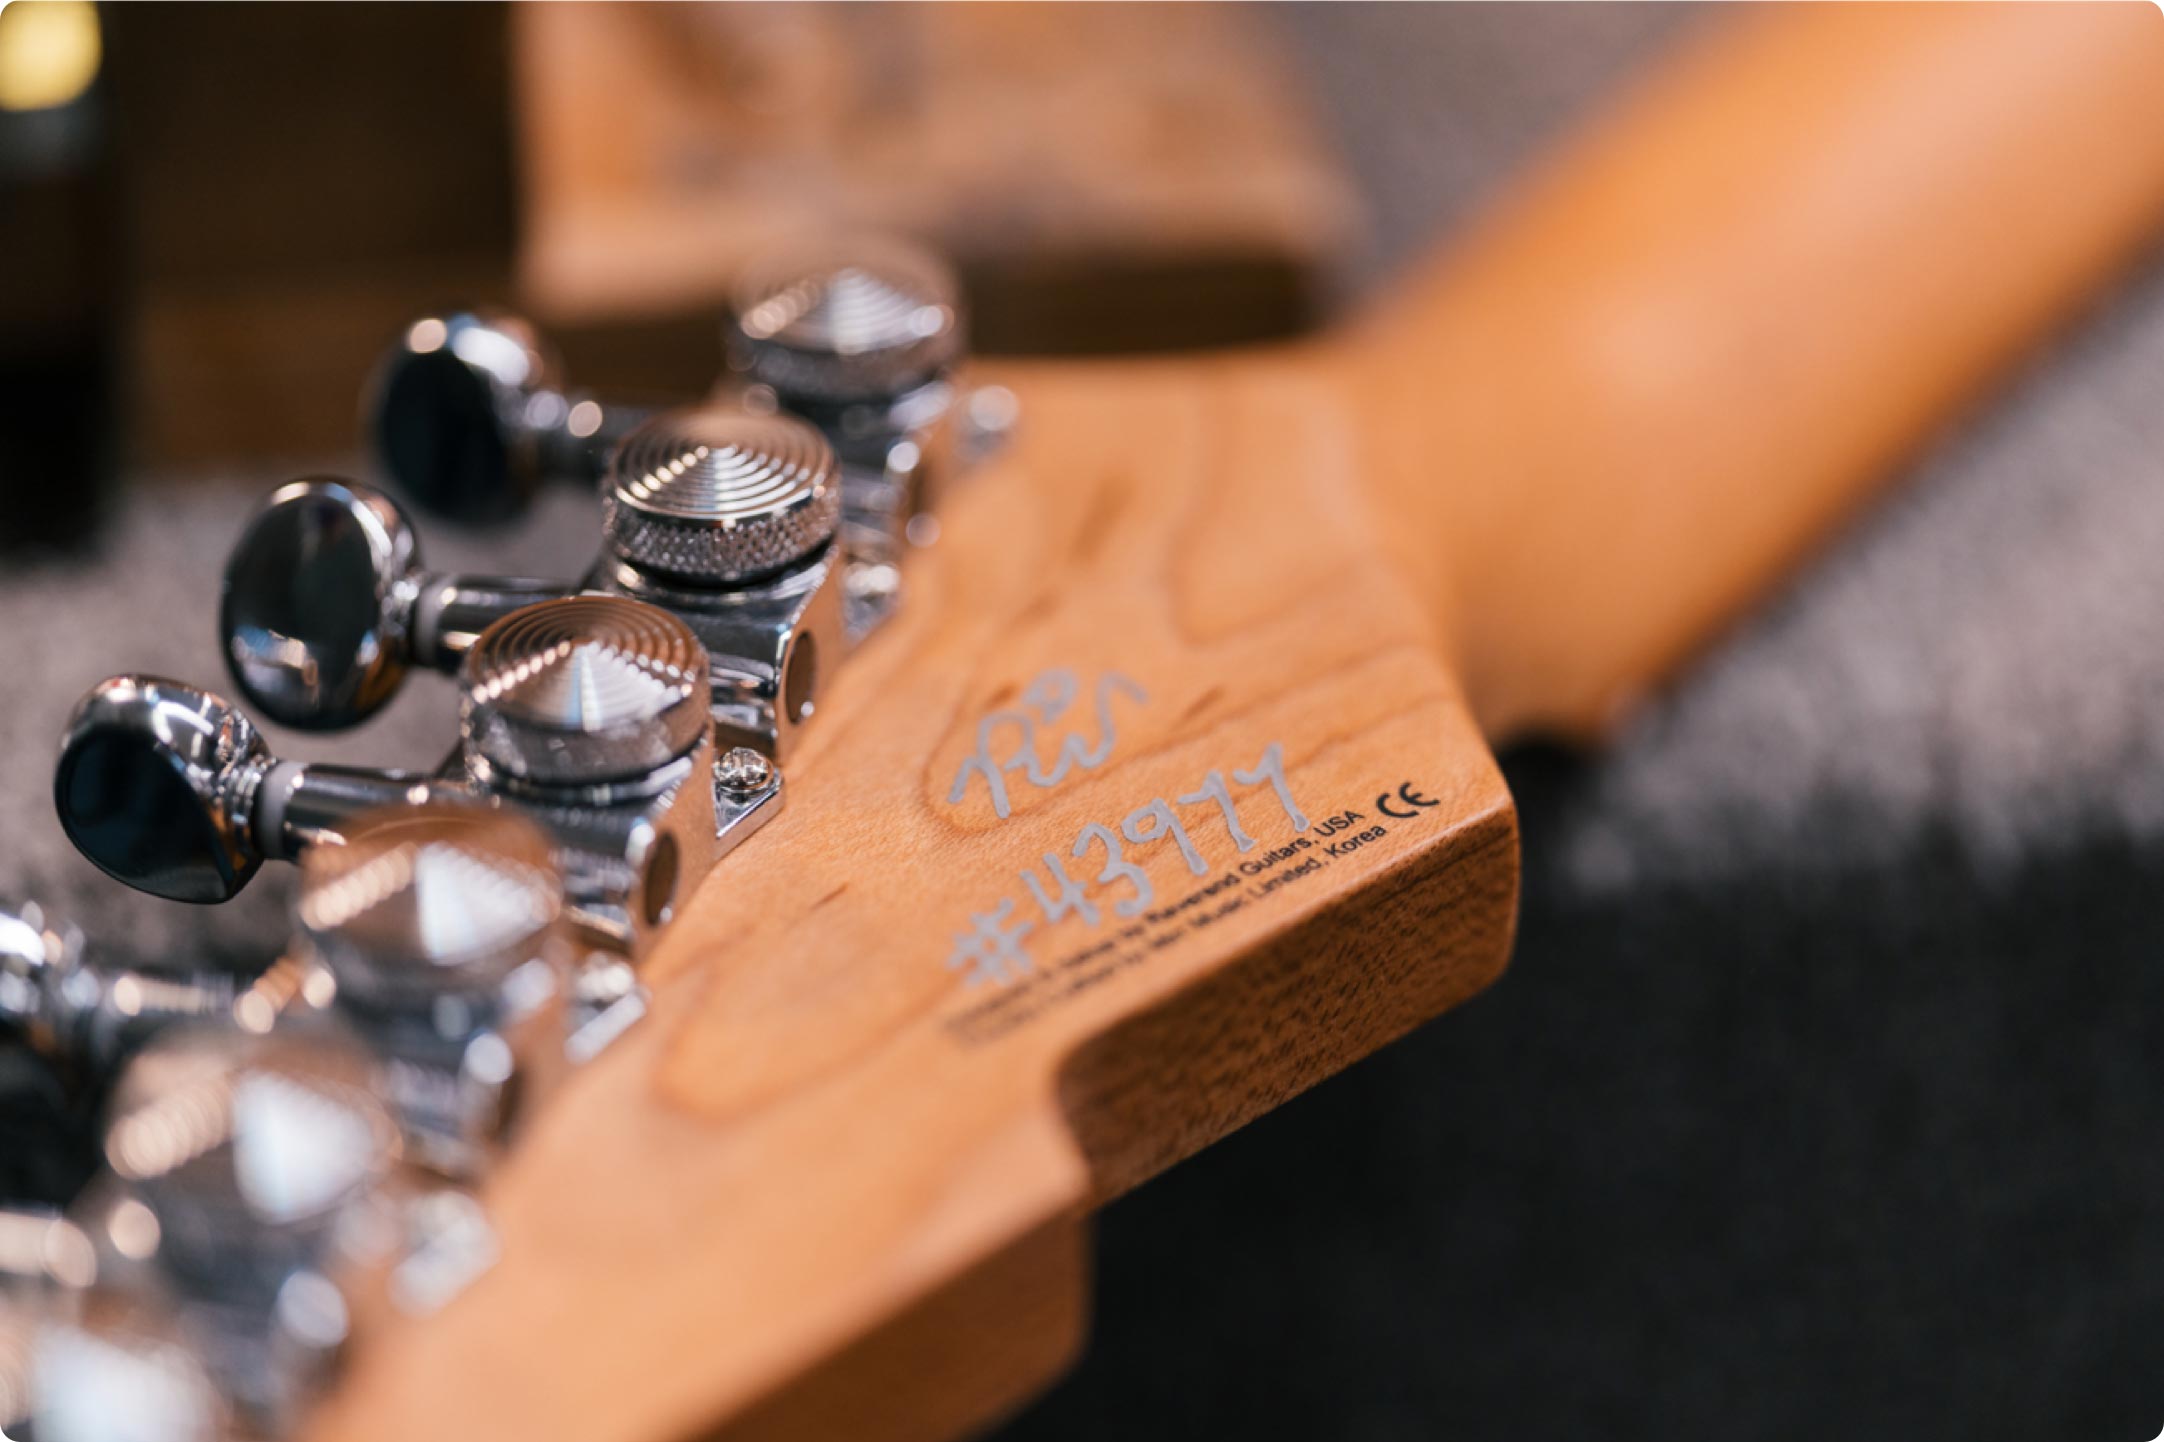 Hub Samenwerking Moet Our Story - Reverend Guitars | We know what players want.